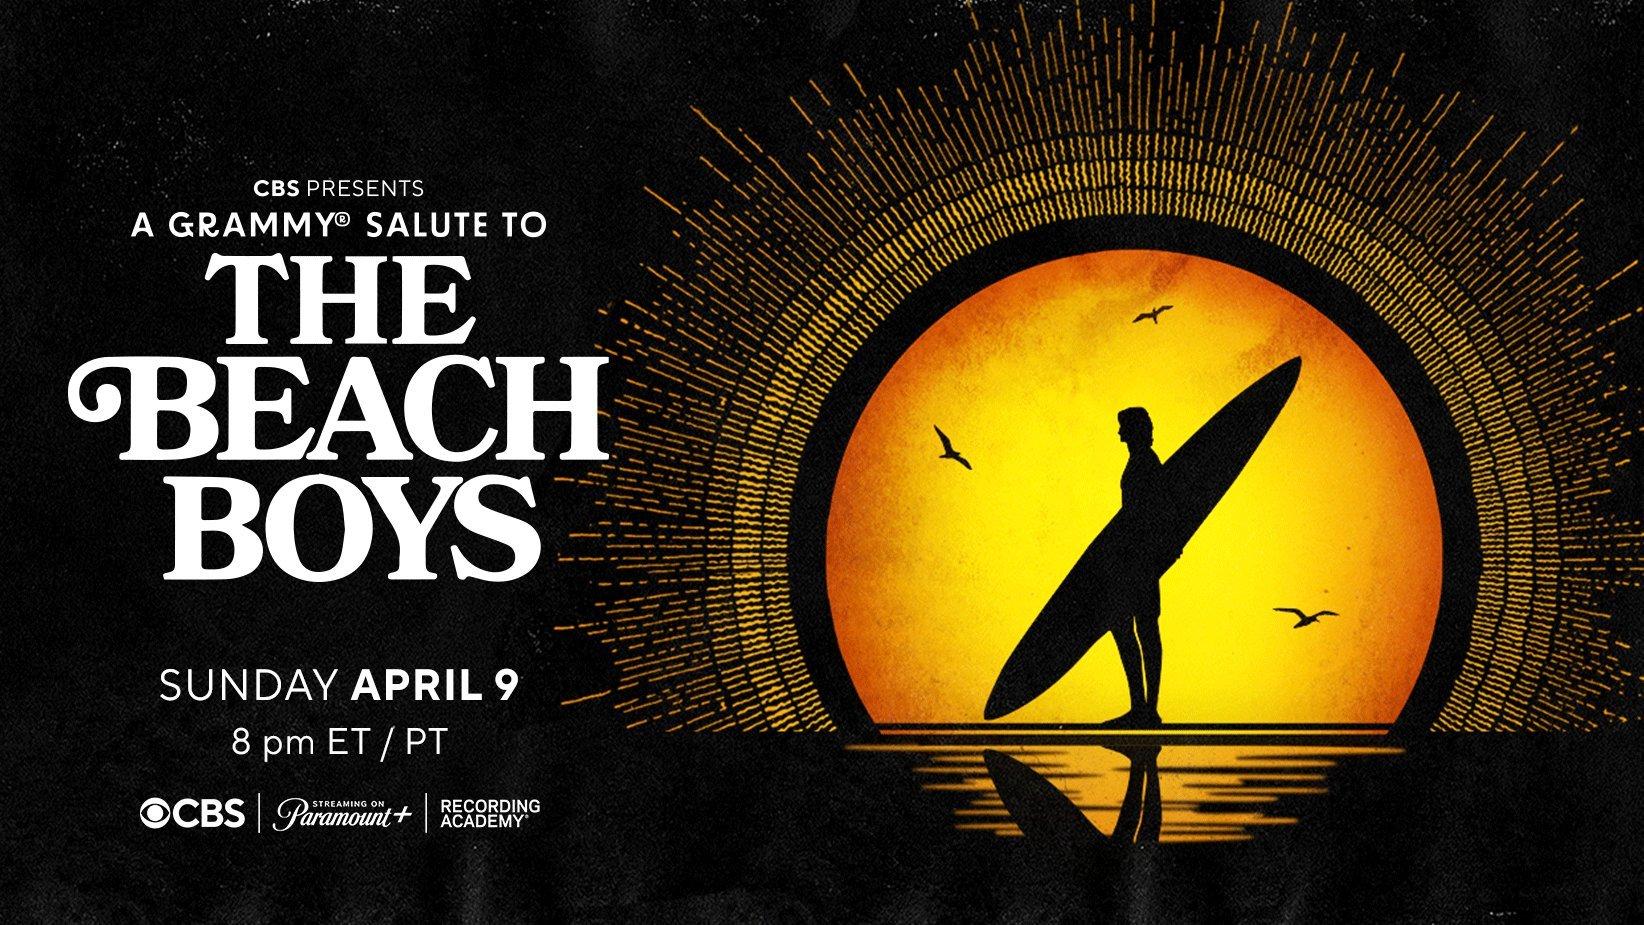 Graphic featuring artwork for "A GRAMMY SALUTE TO THE BEACH BOYS" tribute special